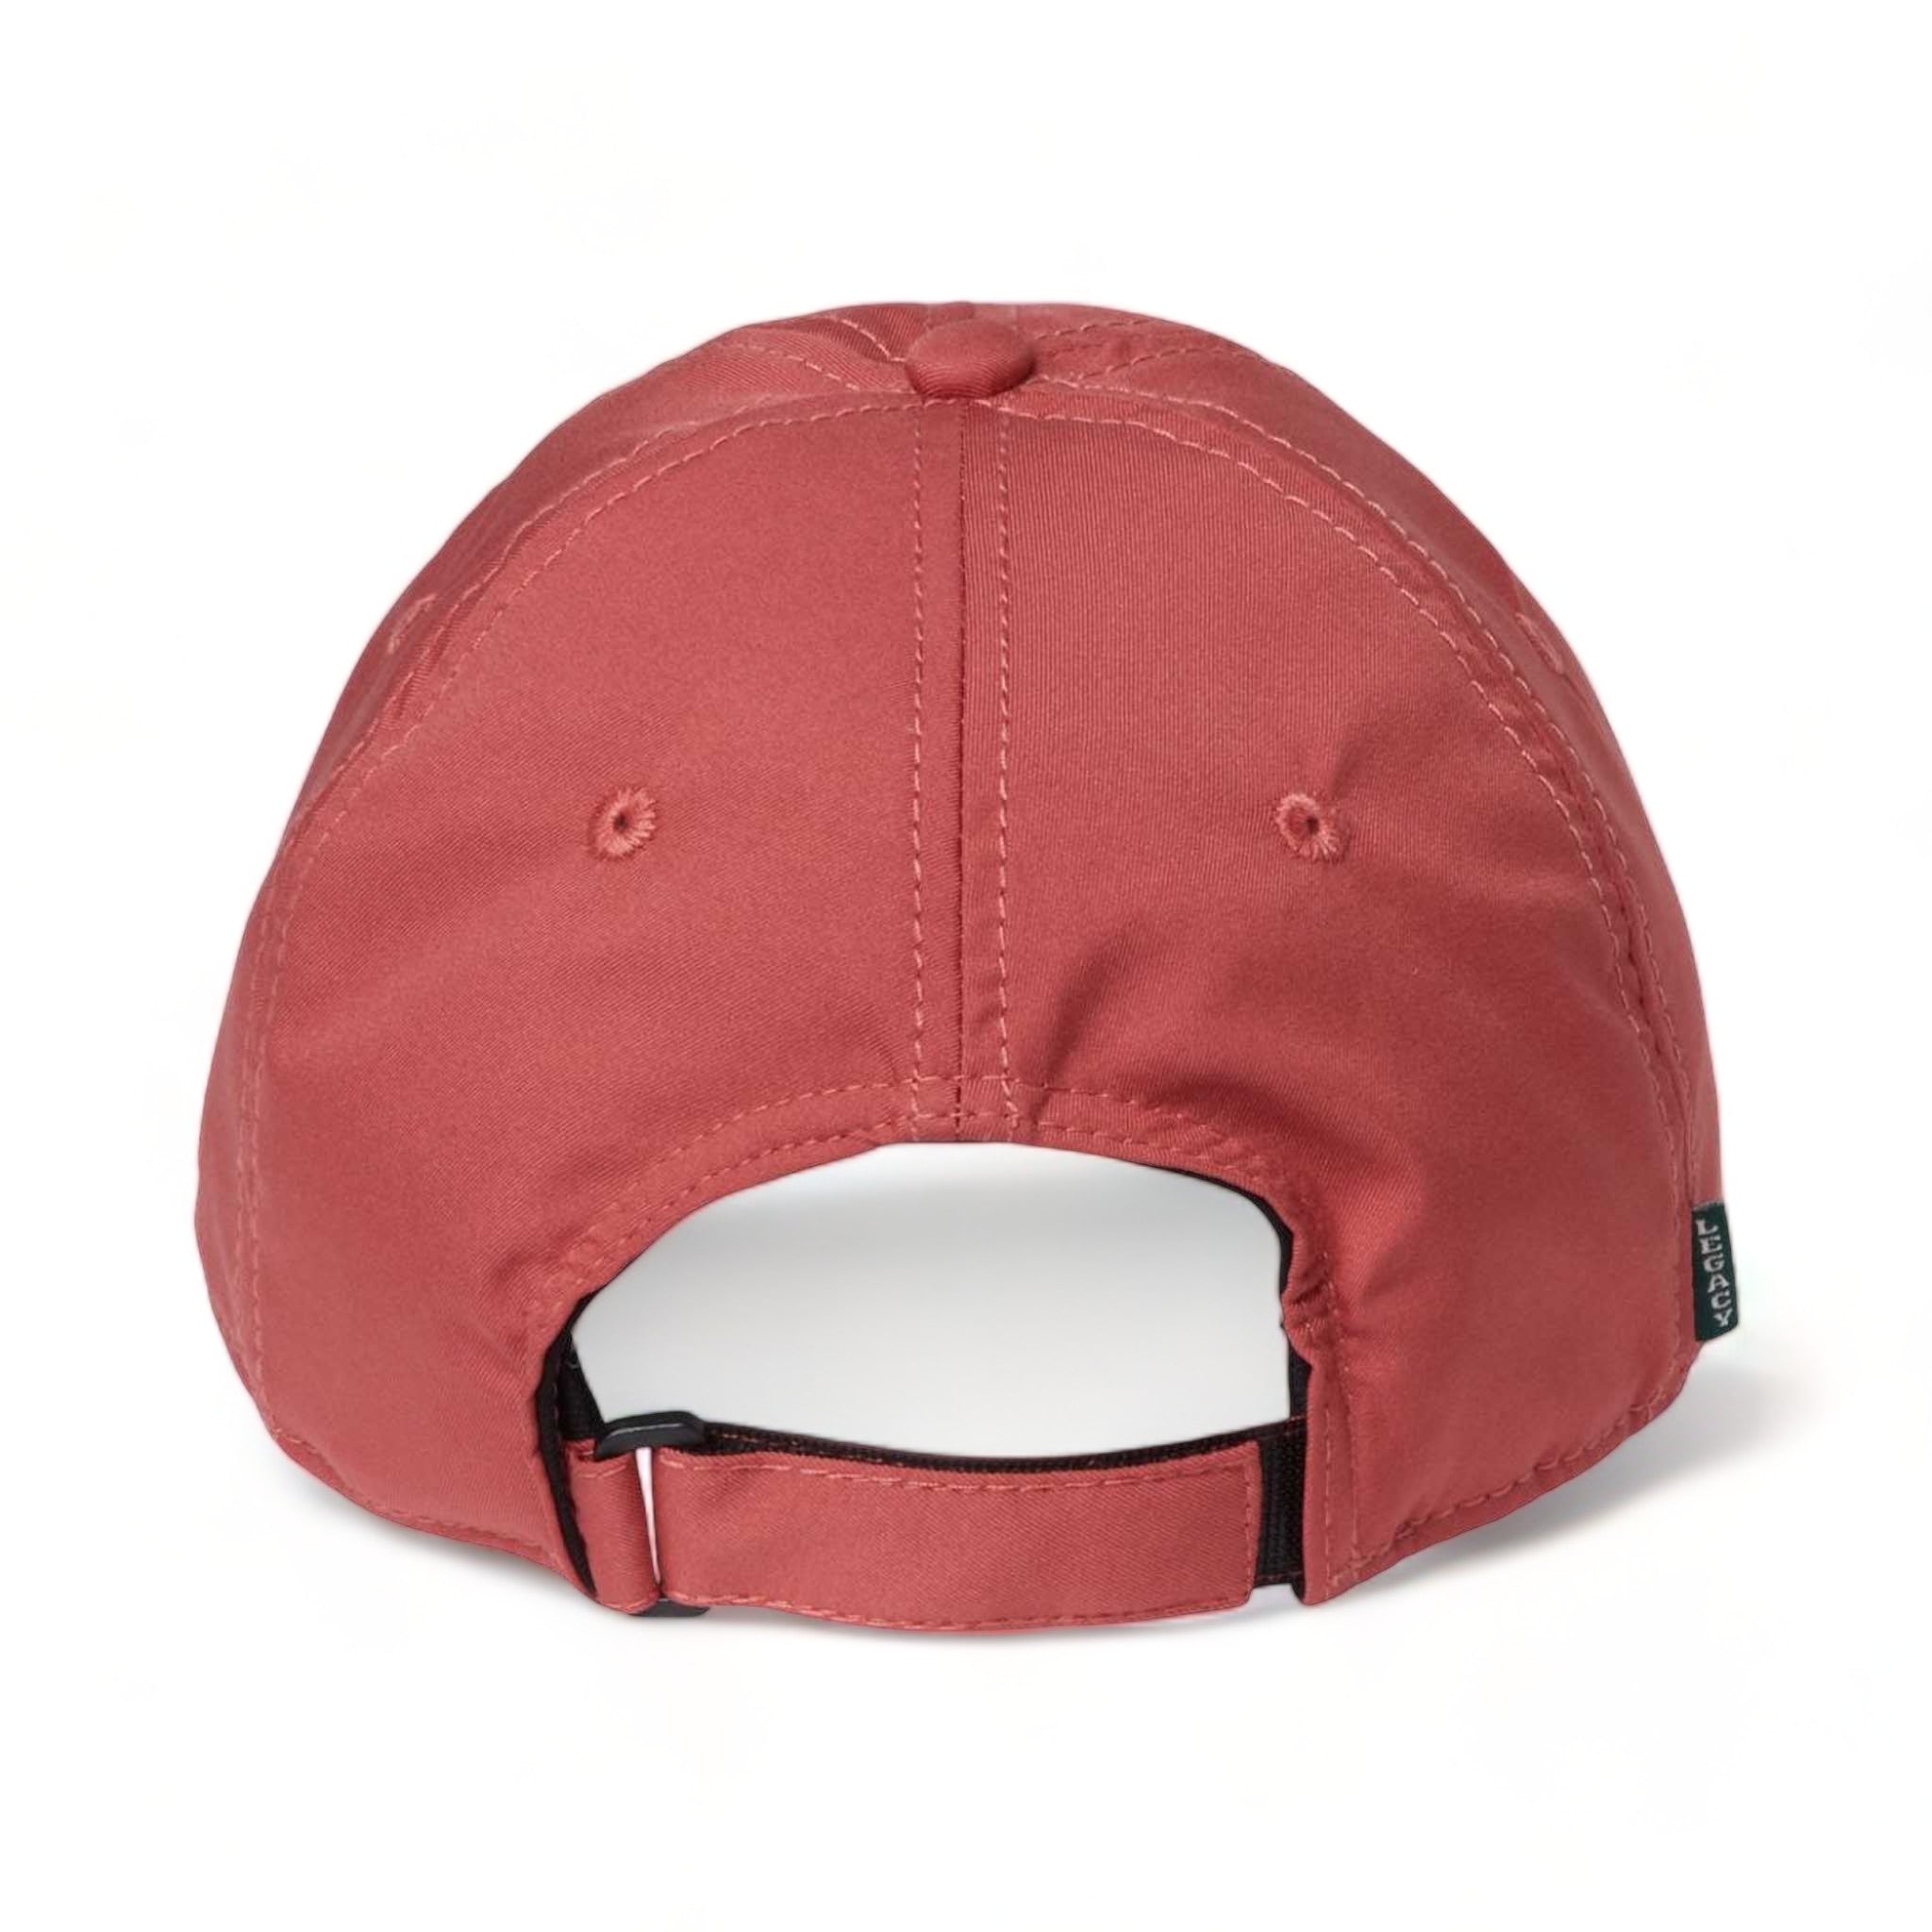 Back view of LEGACY CFA custom hat in nantucket red